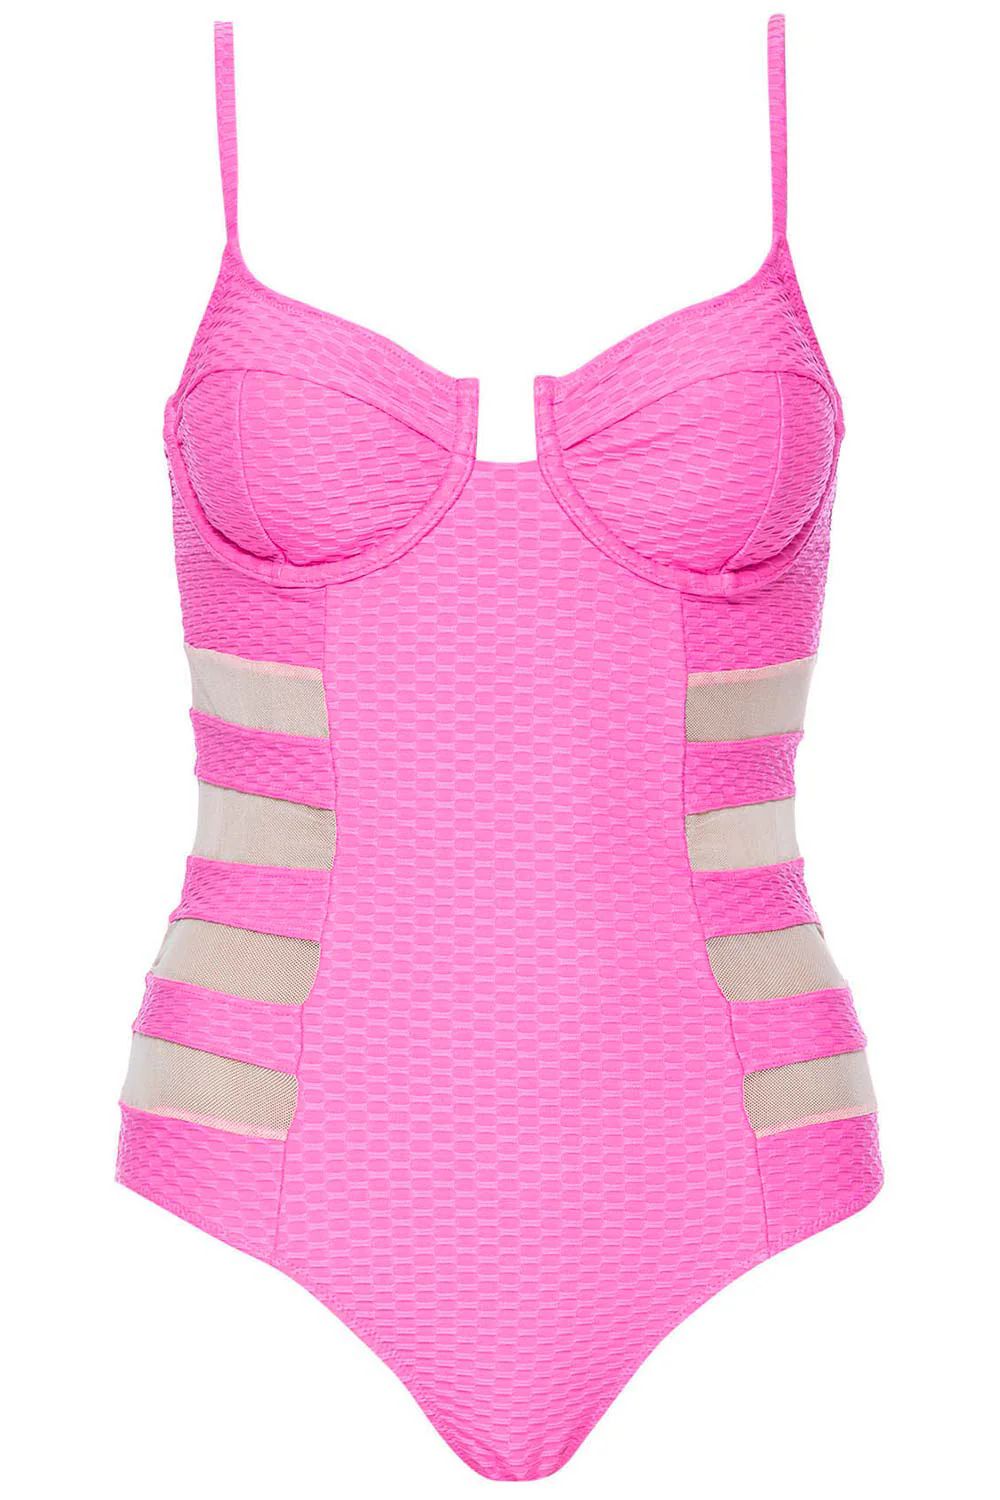 Mesh Underwire Pink Swimsuit | VETCHY